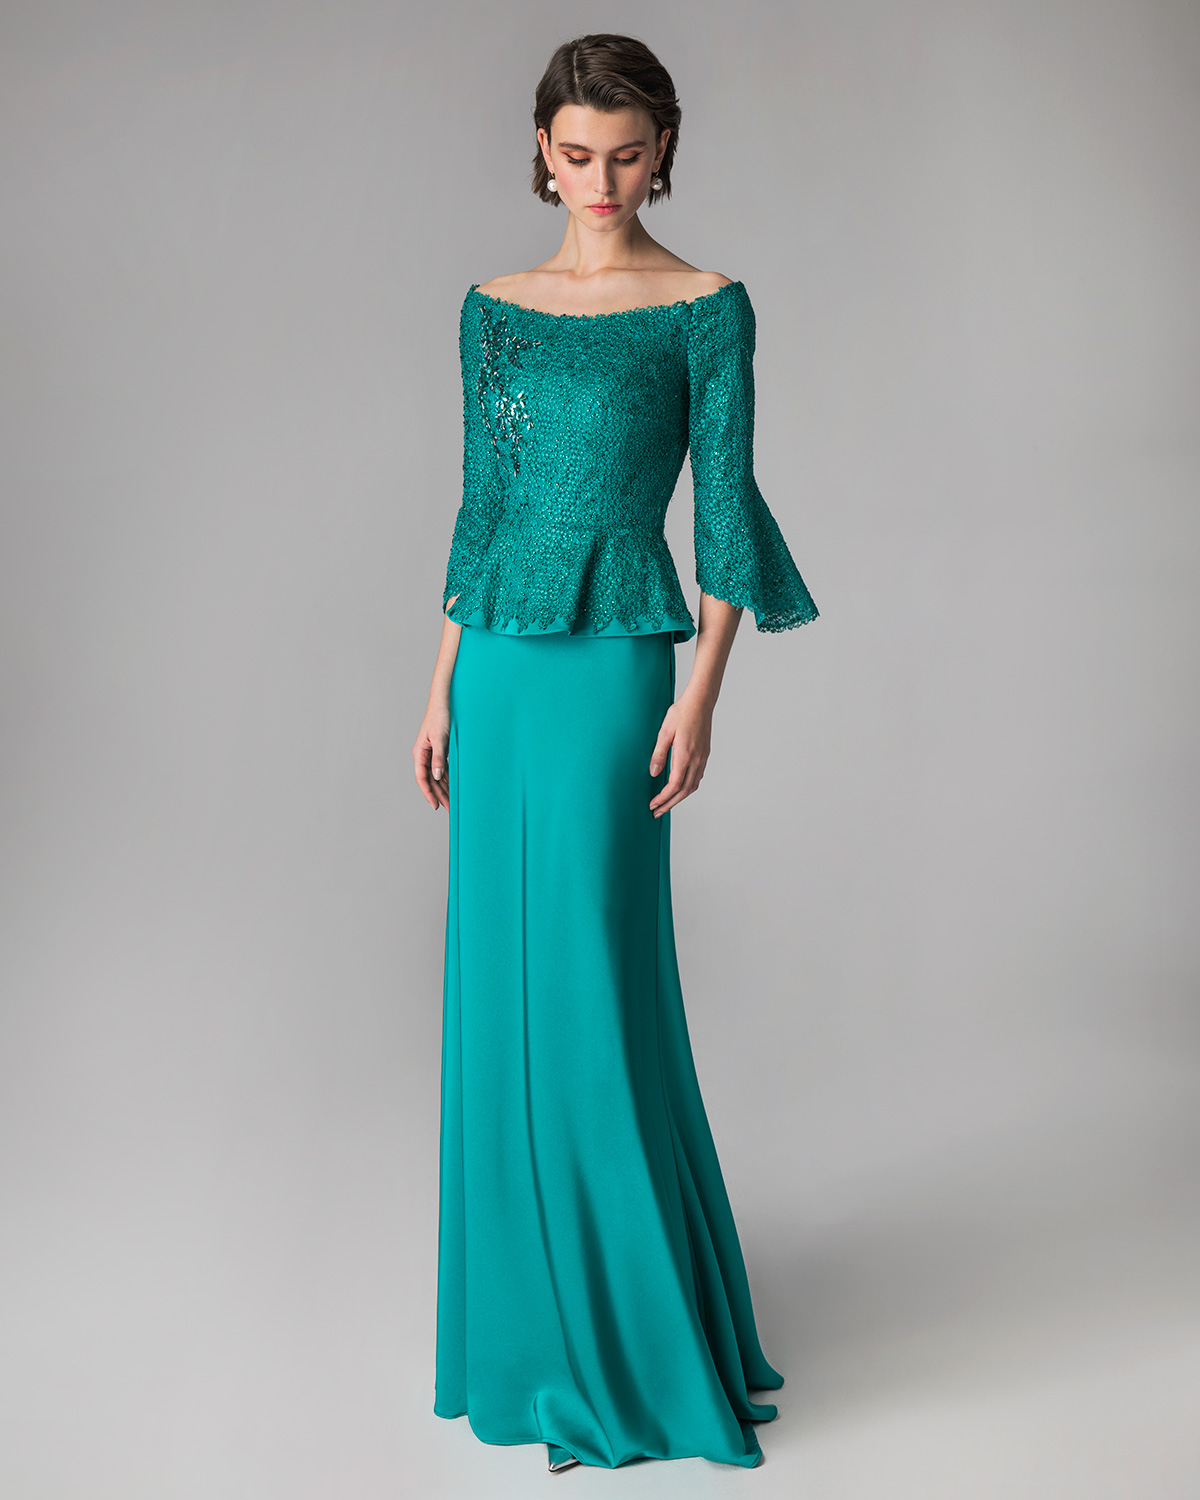 Classic Dresses / Long evening dress with lace top and long sleeves